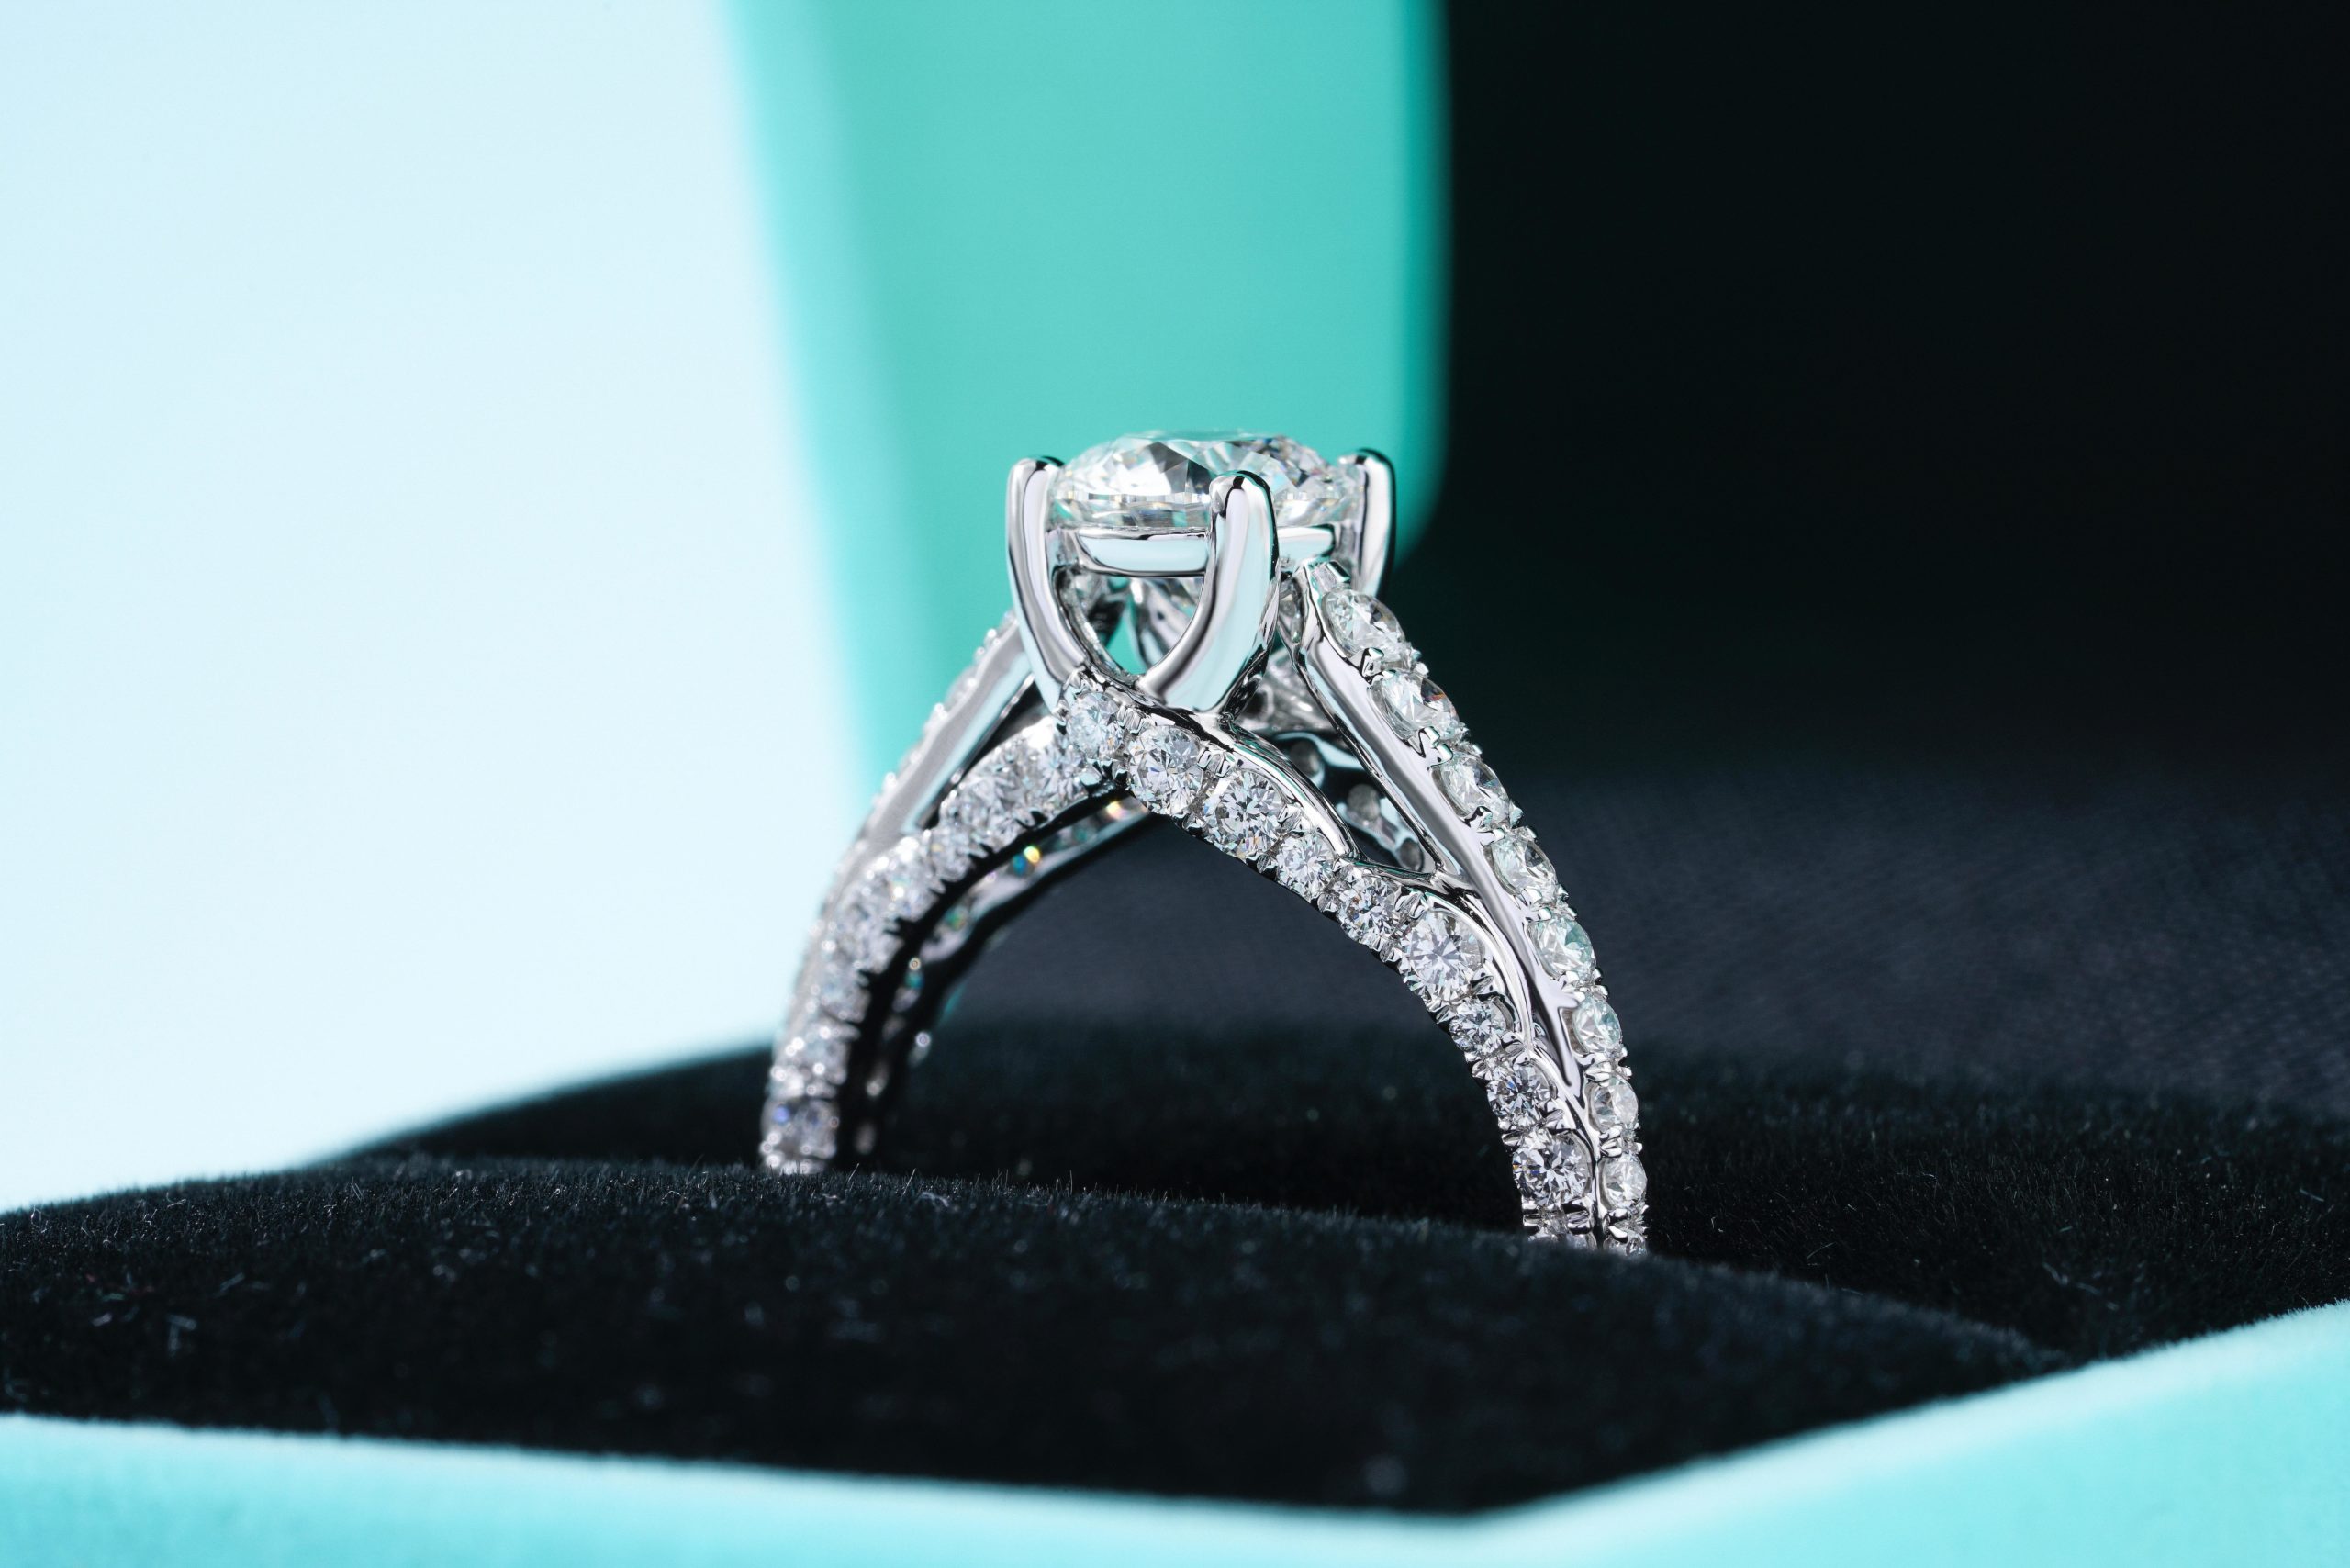 Engagement Rings- A Customary Present For The Newly Engaged